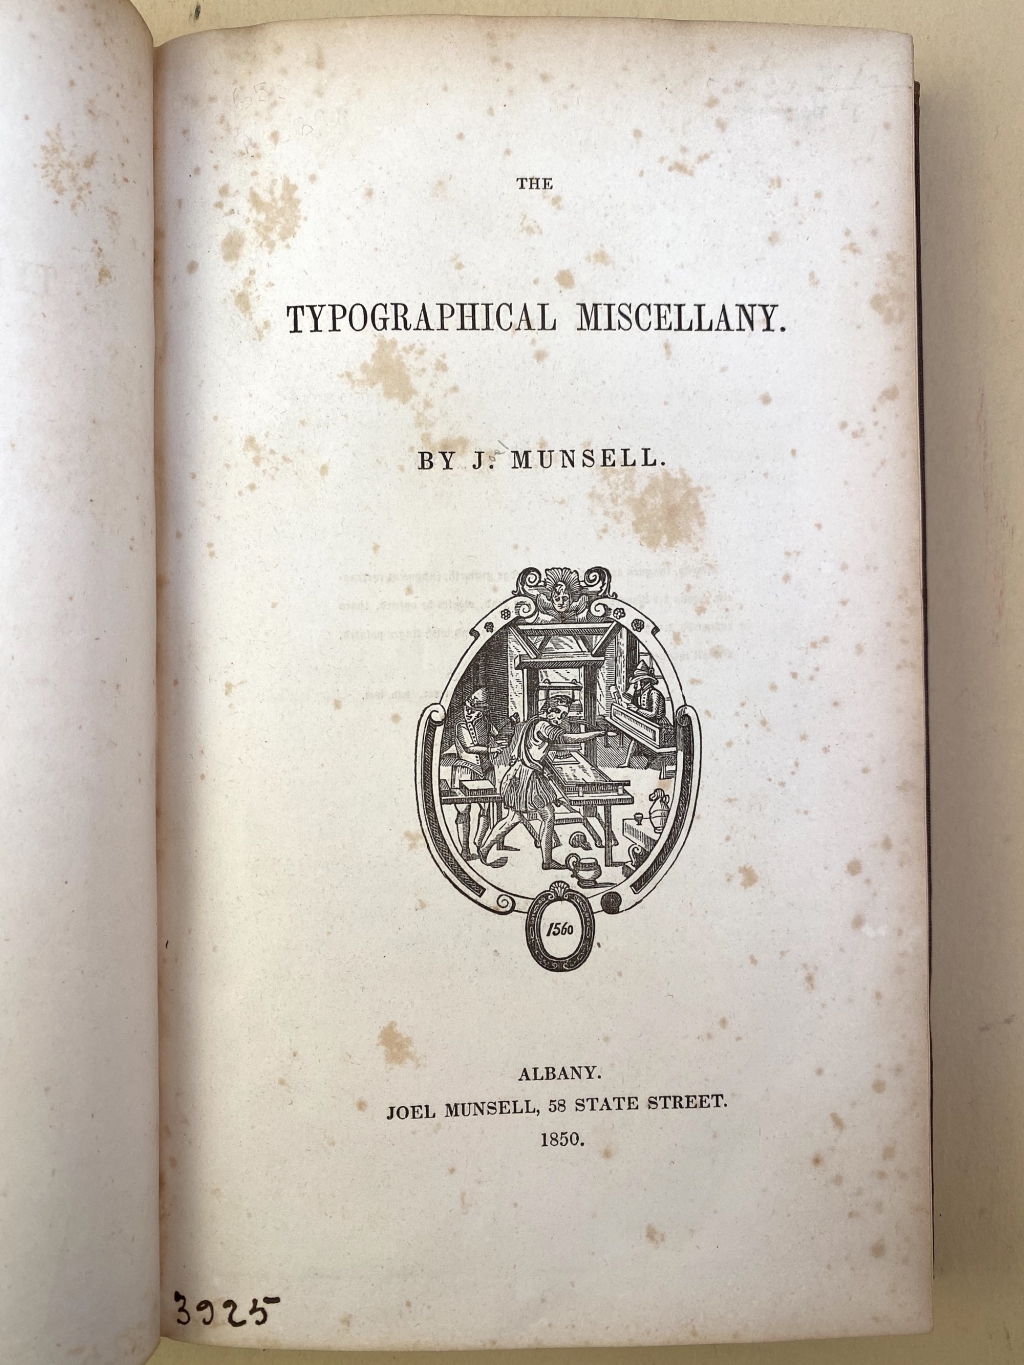 Title page of Munsell's The Typographical Miscellany